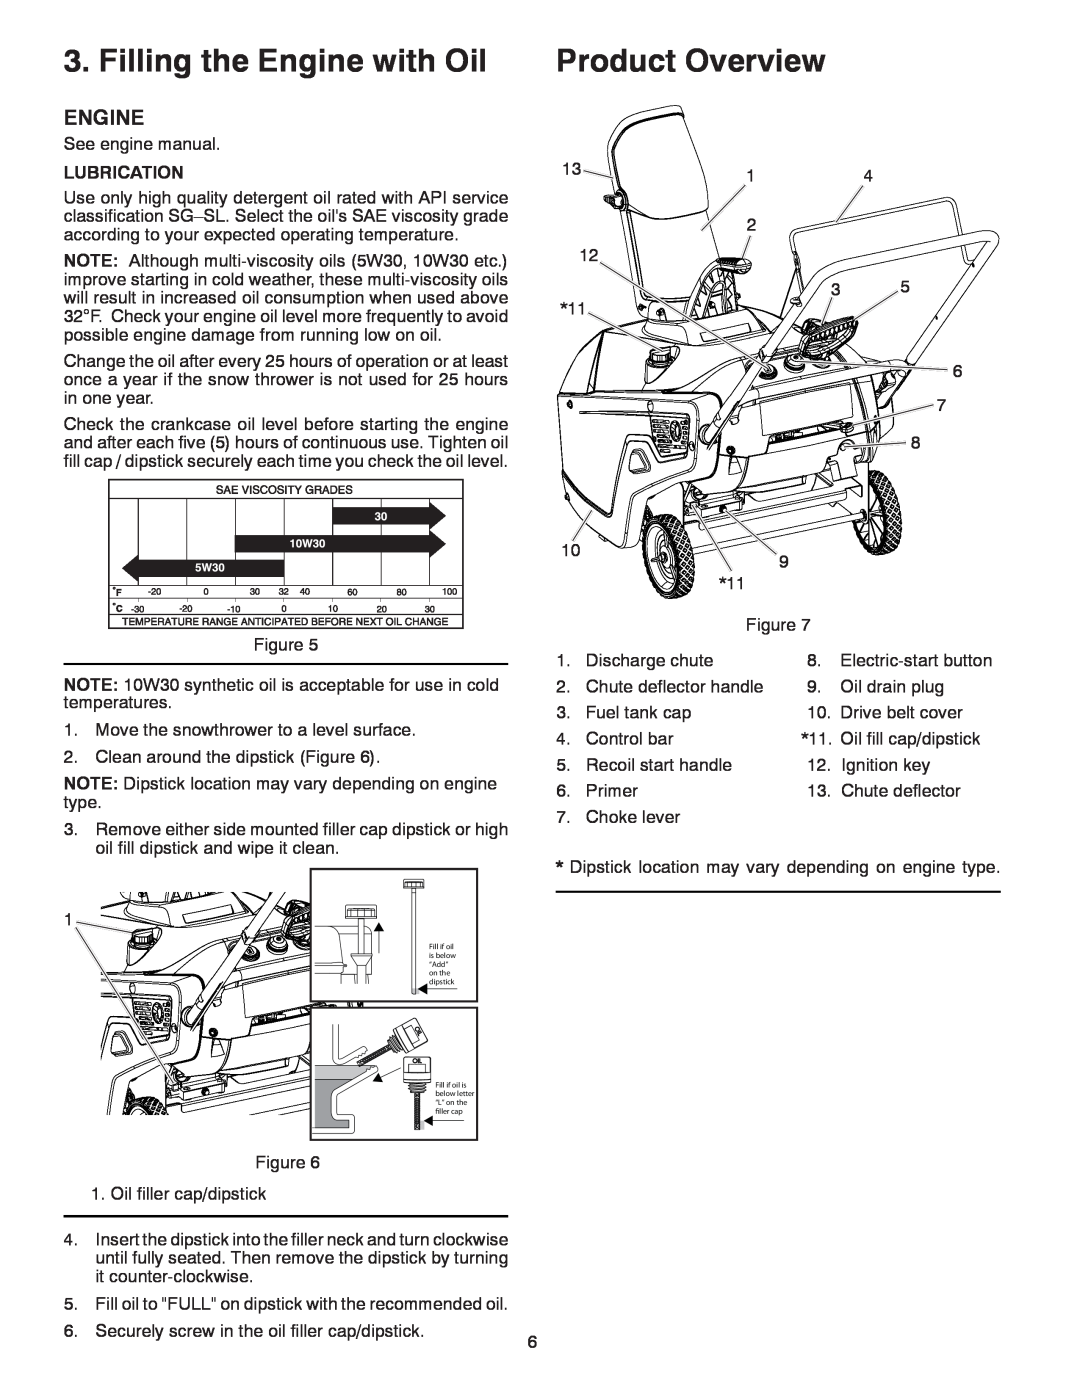 McCulloch 96188000300 owner manual Filling the Engine with Oil, Product Overview, Lubrication 